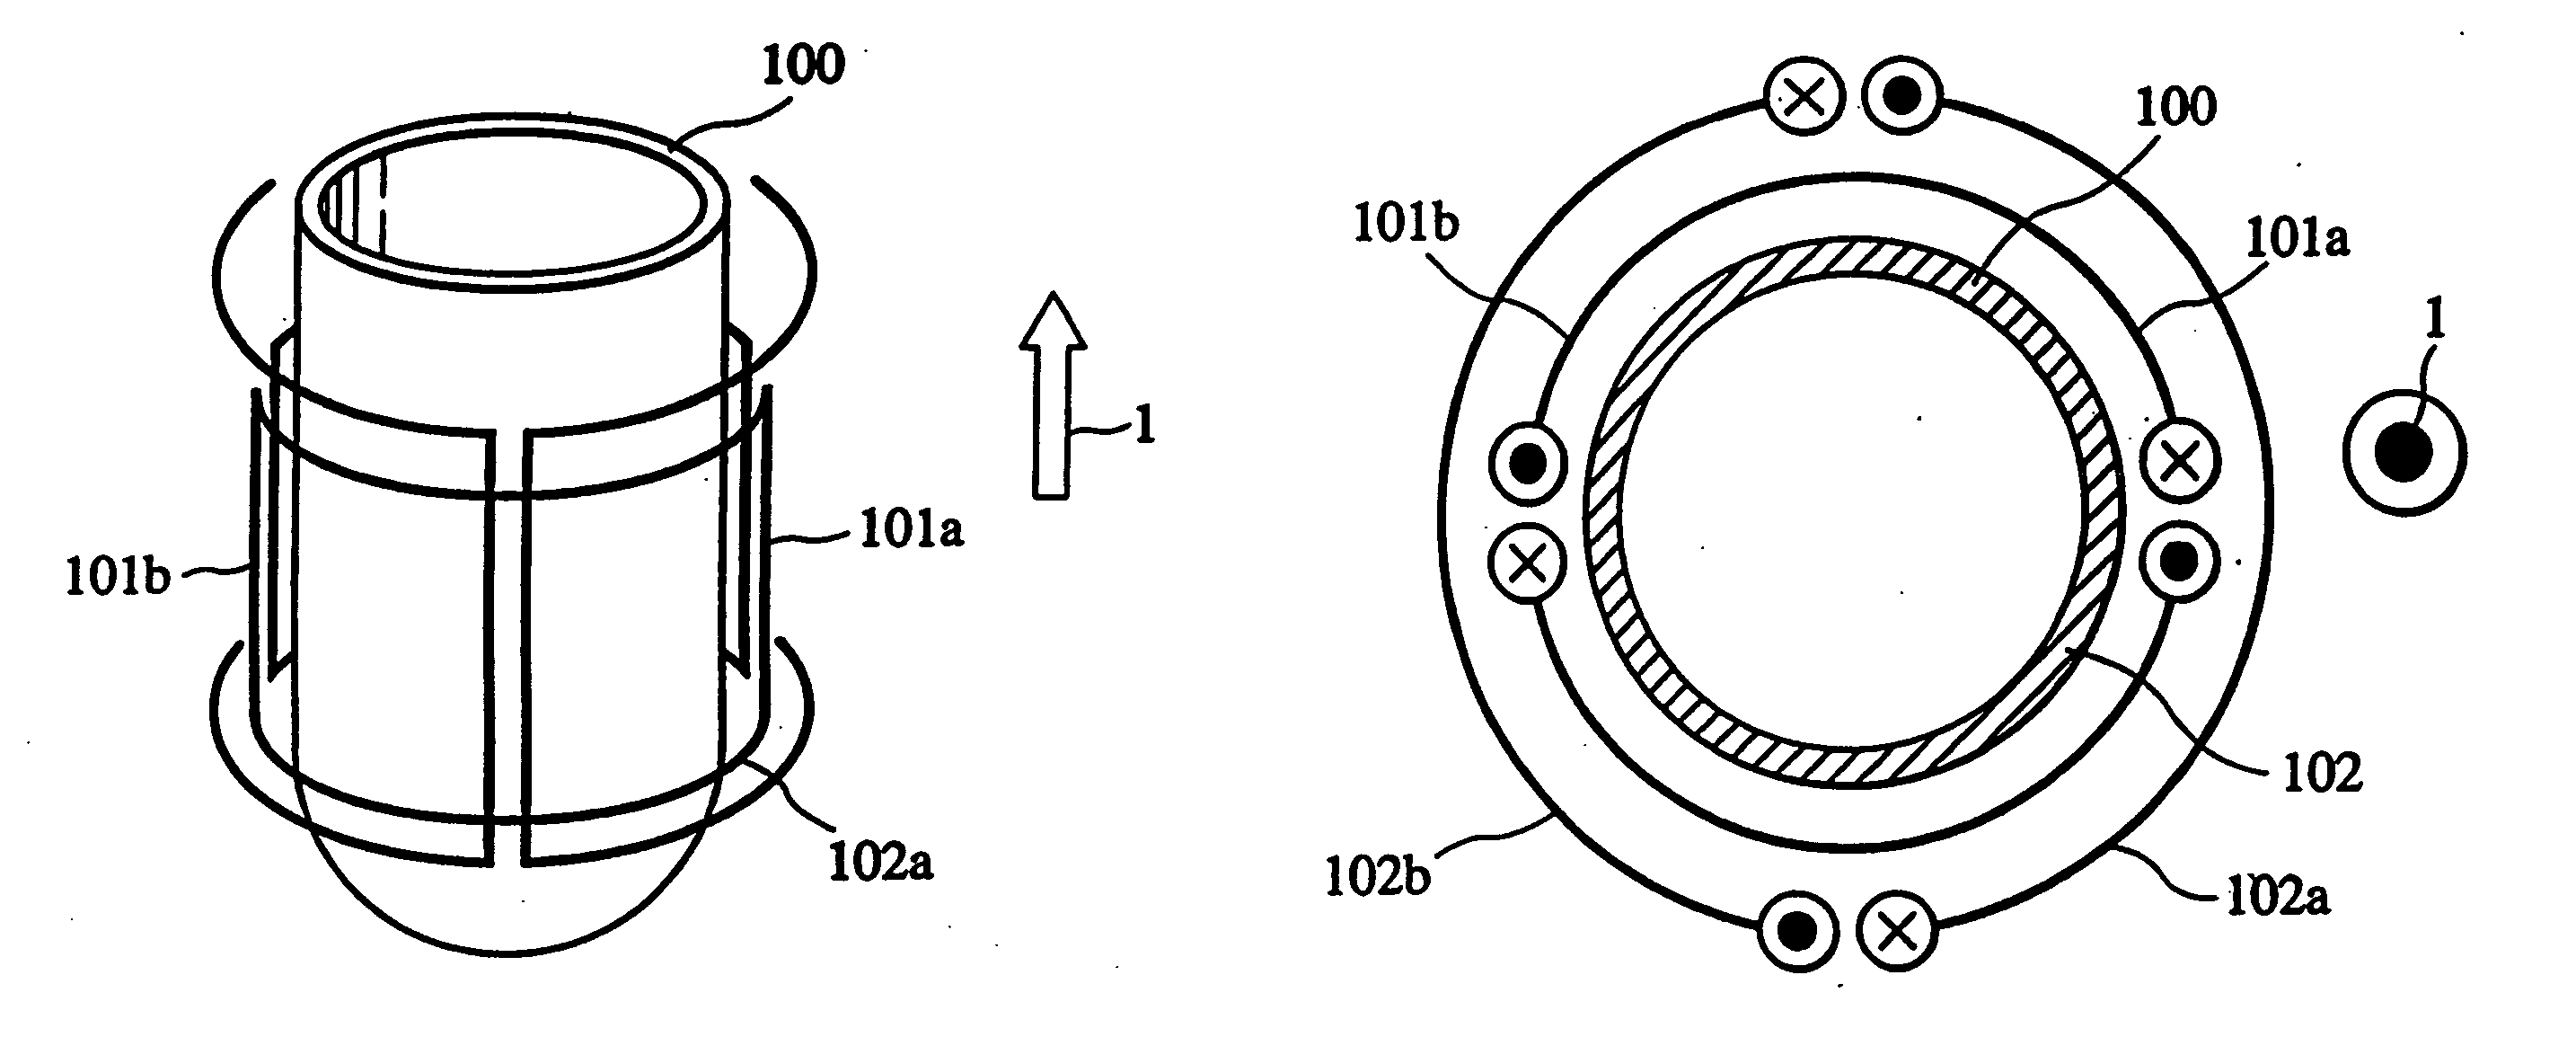 Nuclear magnetic resonance apparatus probe